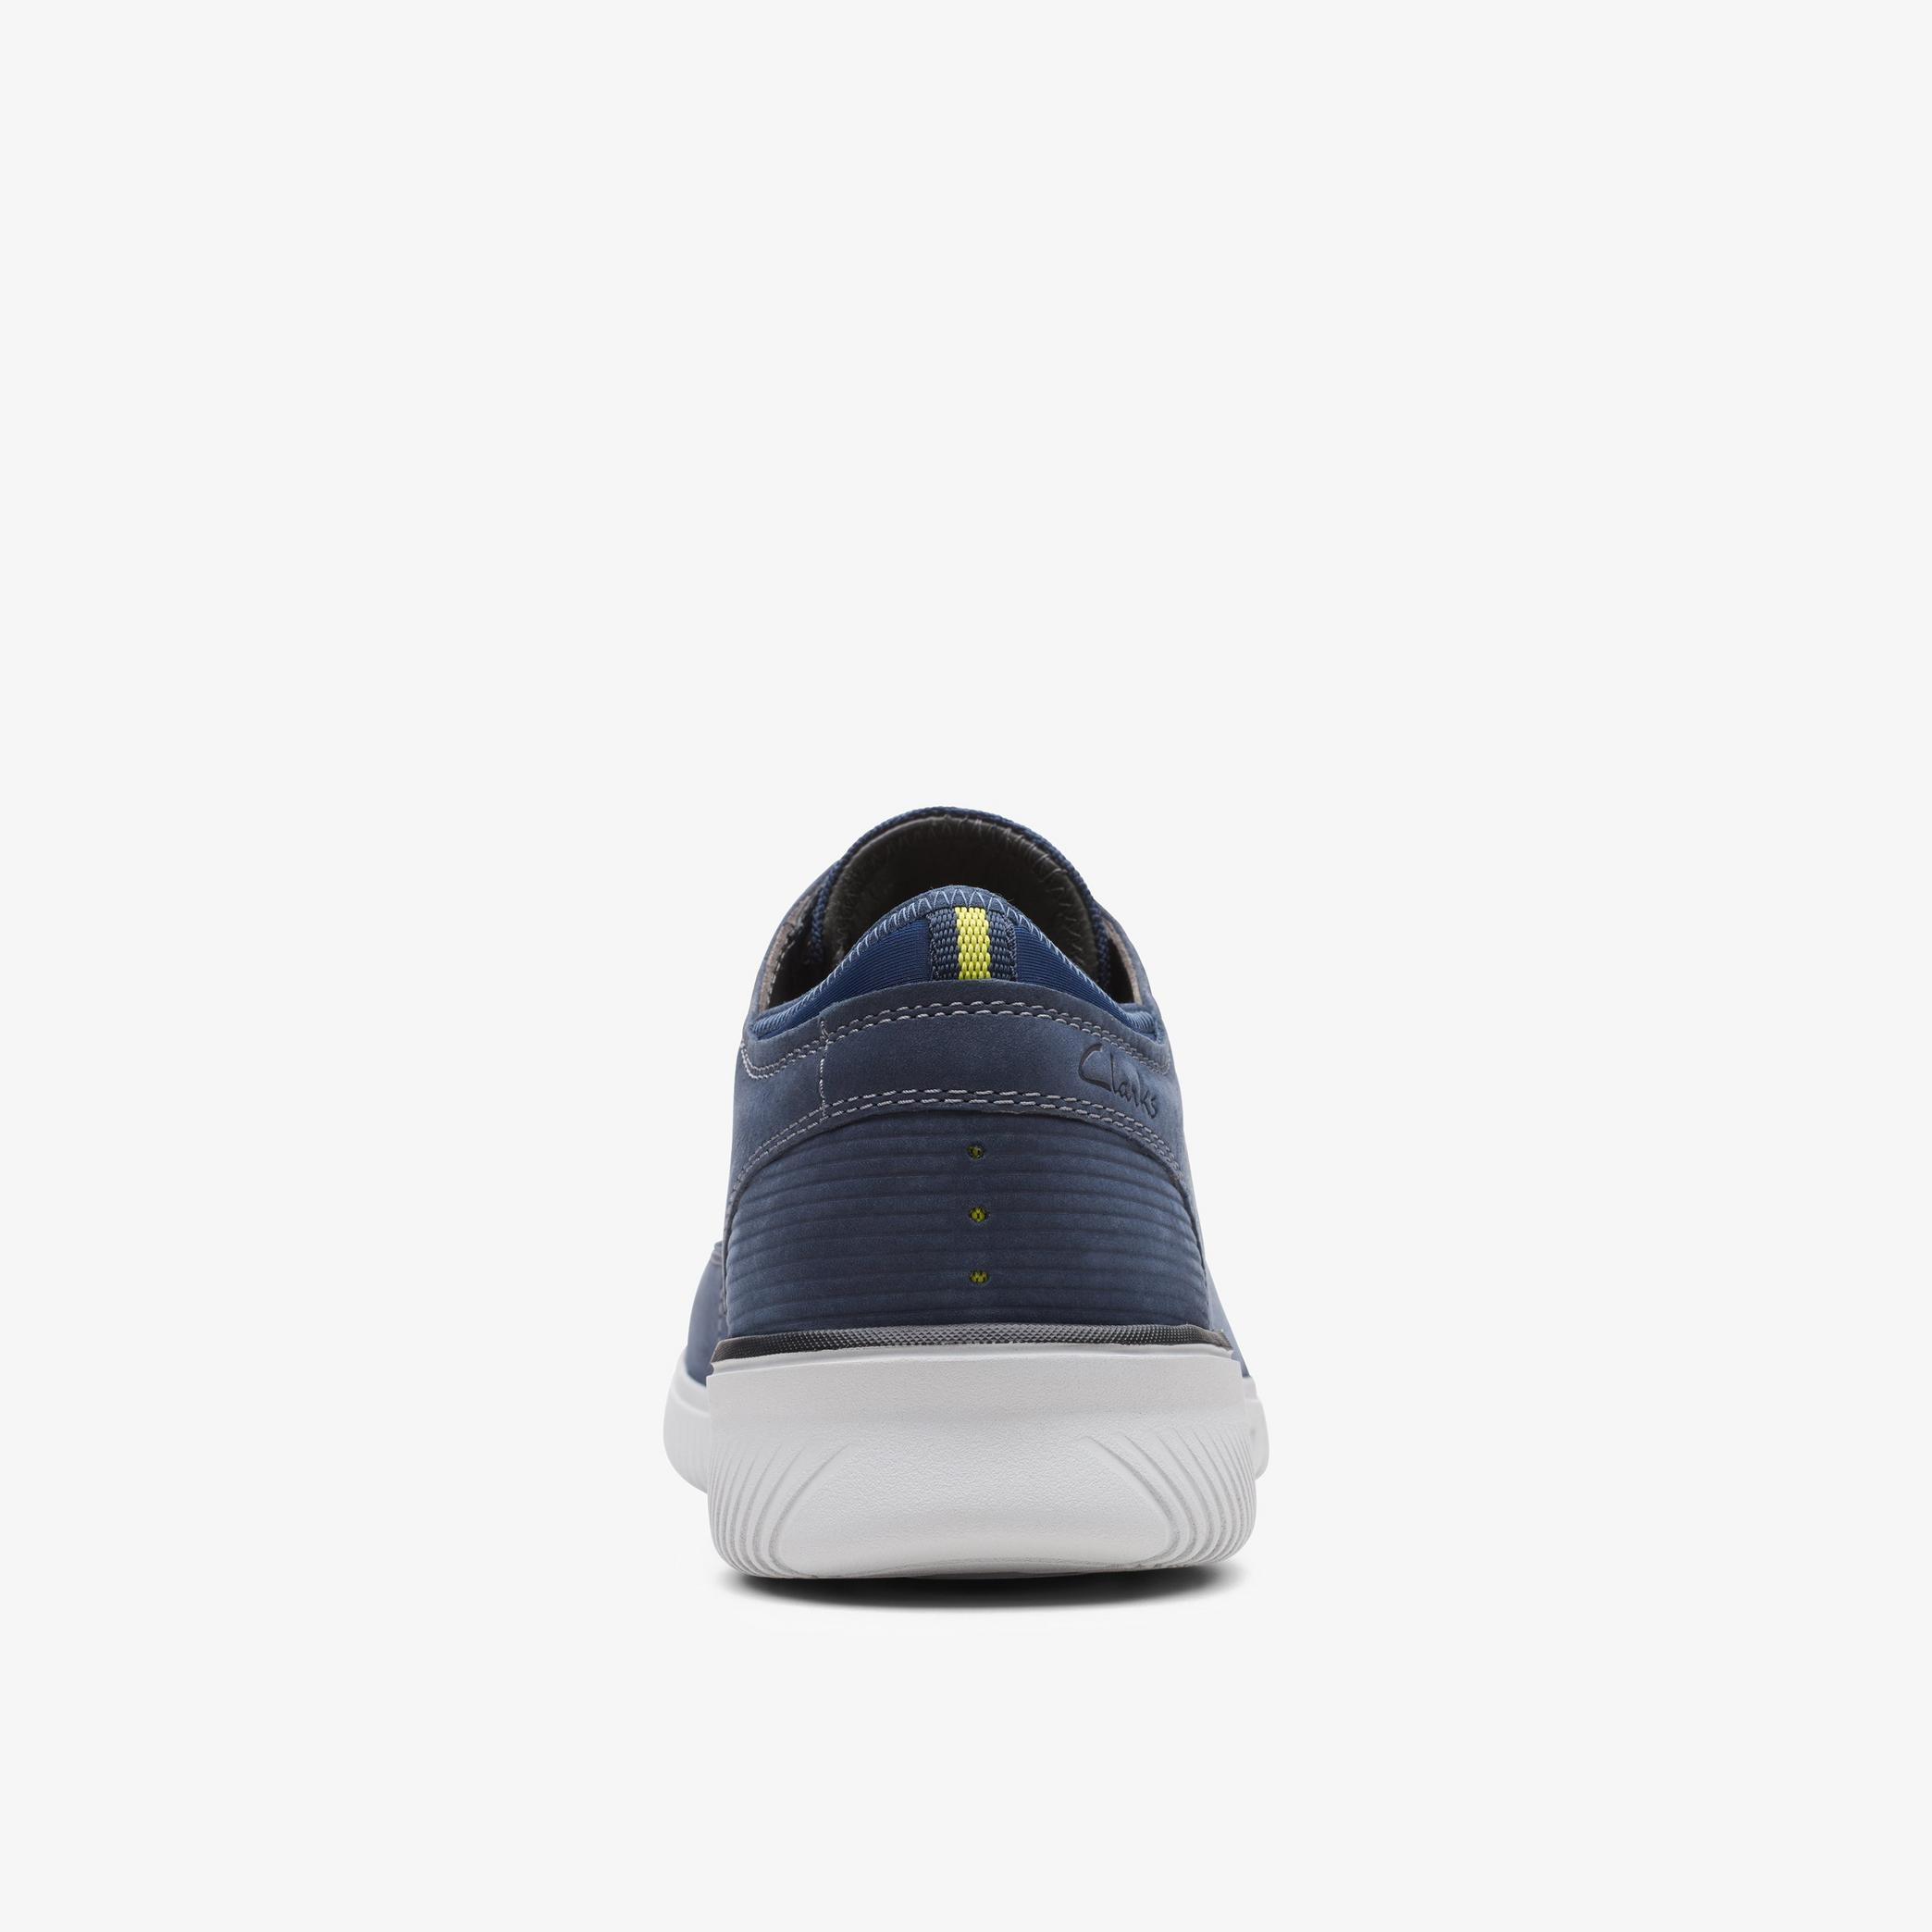 Donaway Lace Navy Nubuck Shoes, view 5 of 6